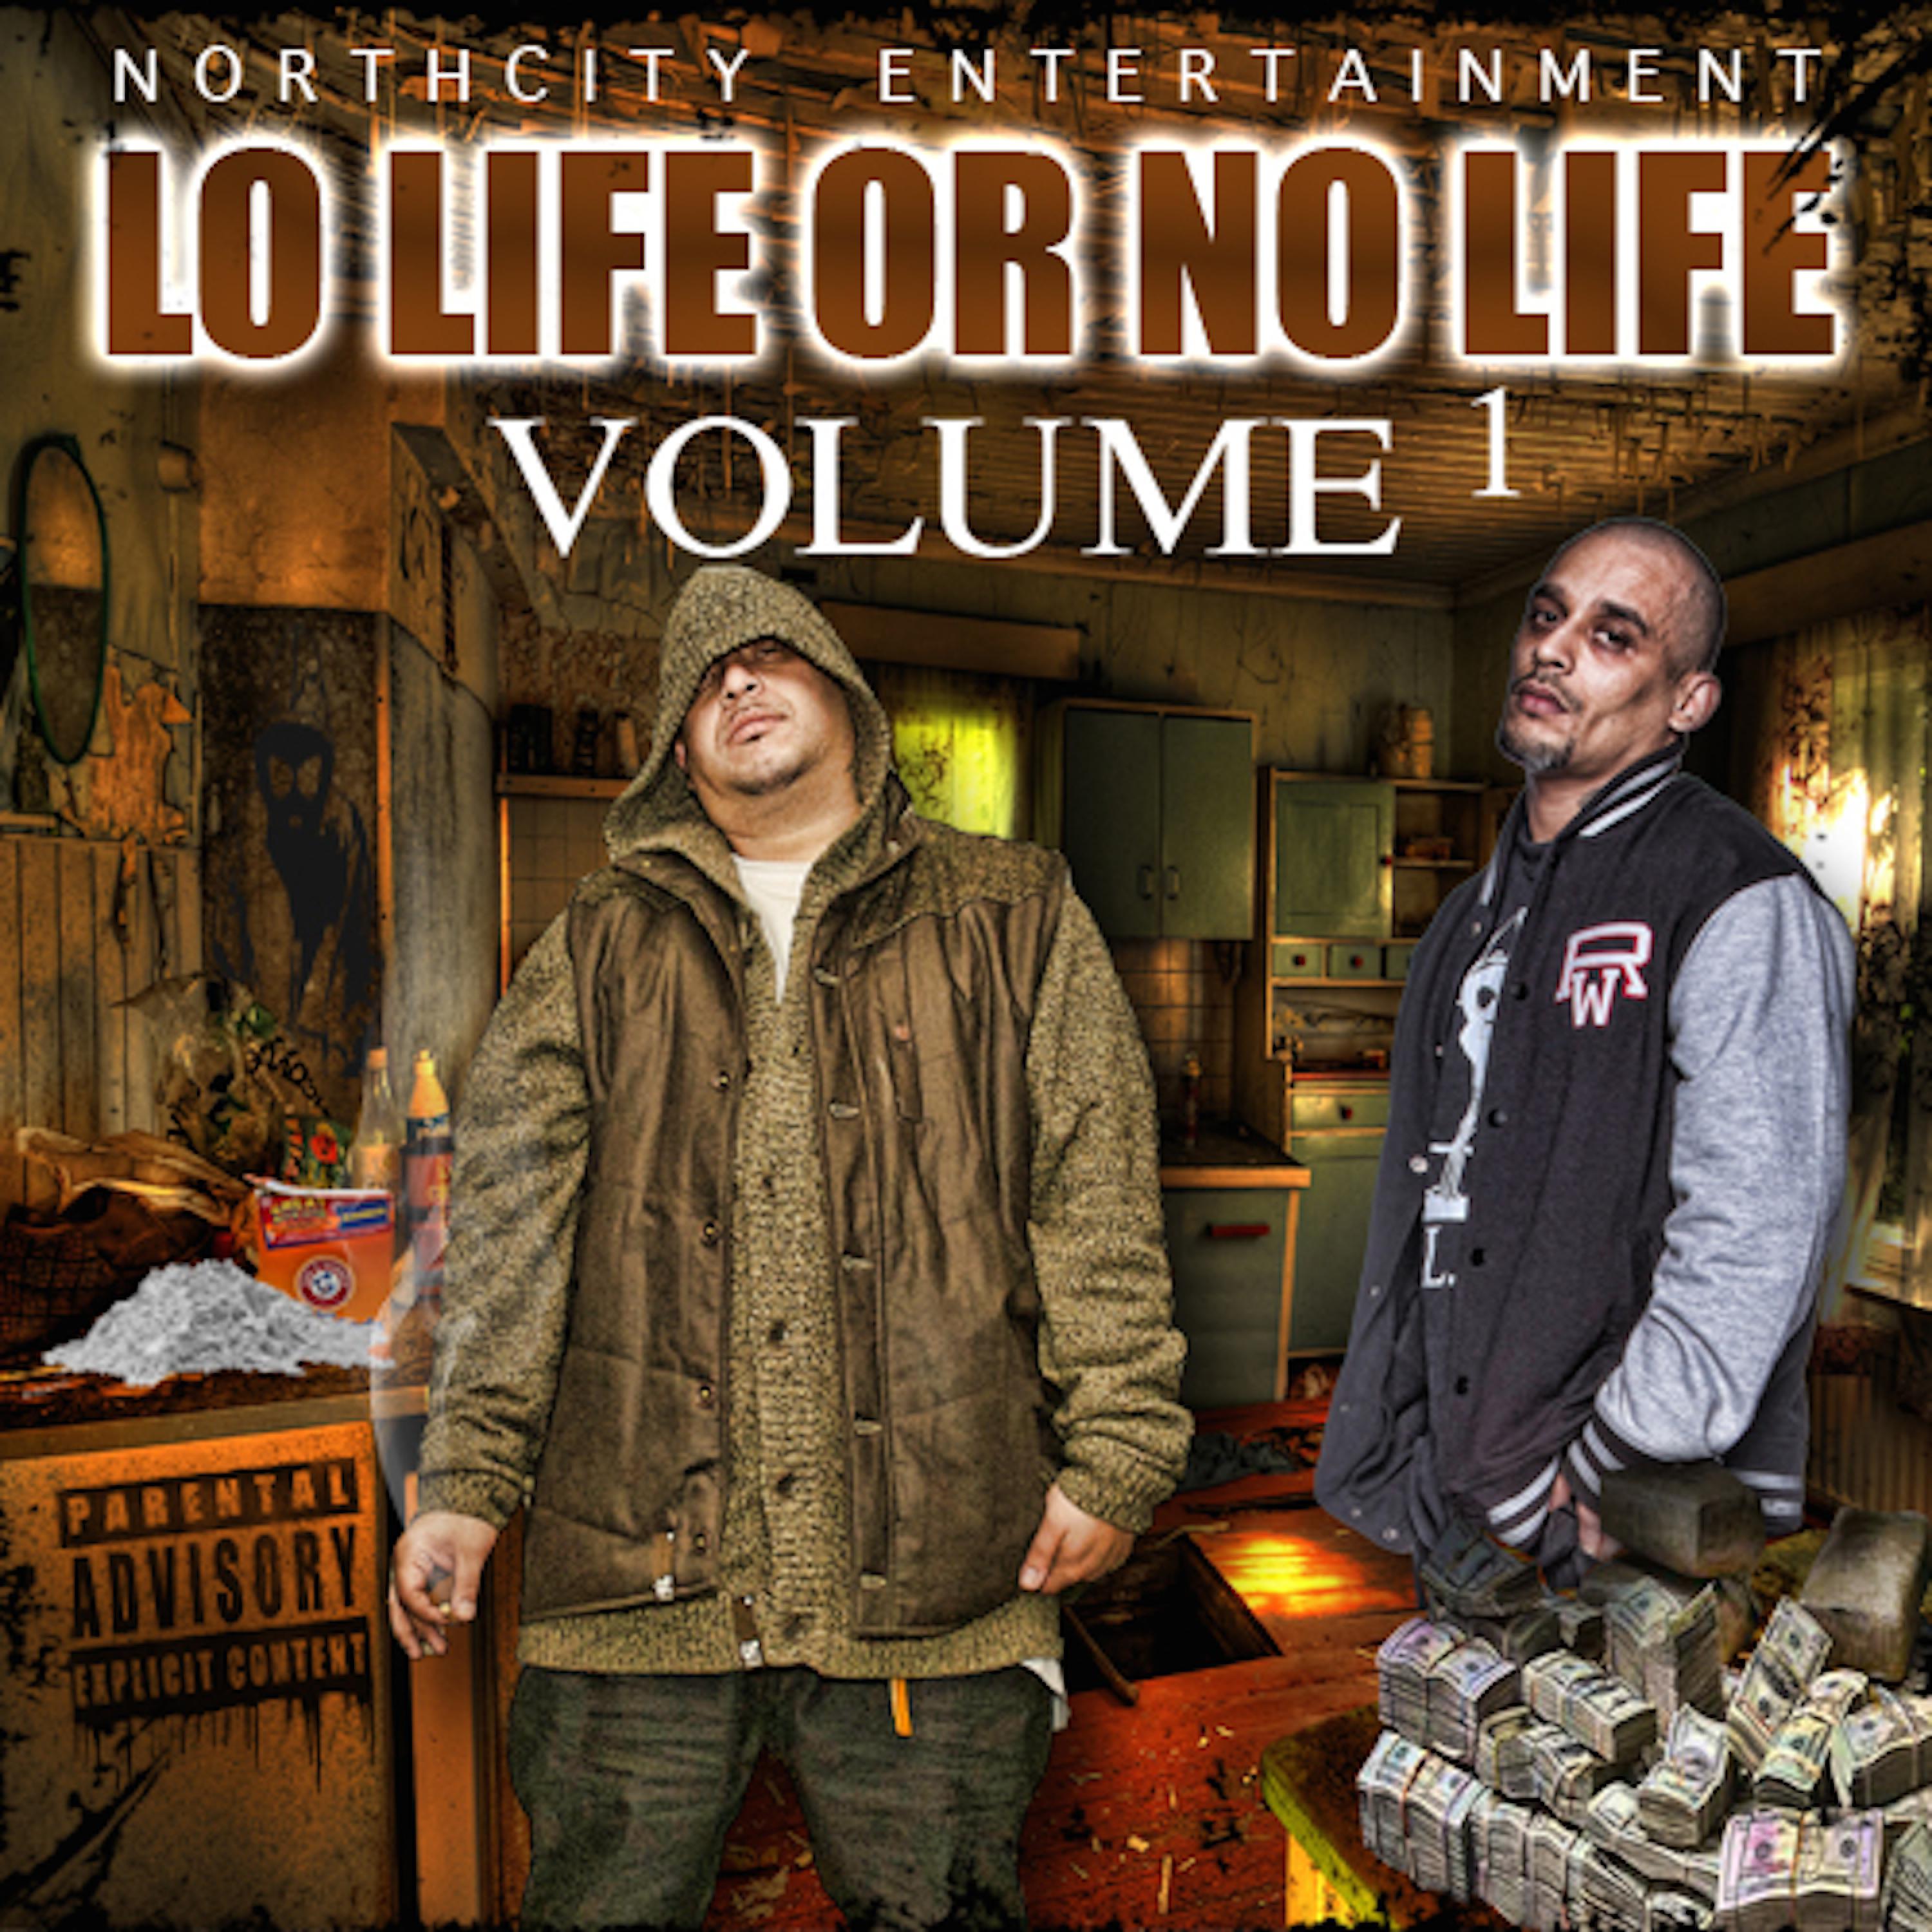 Grammz - Word To Life (Dedicated 2 My Brother Po Pizzle)